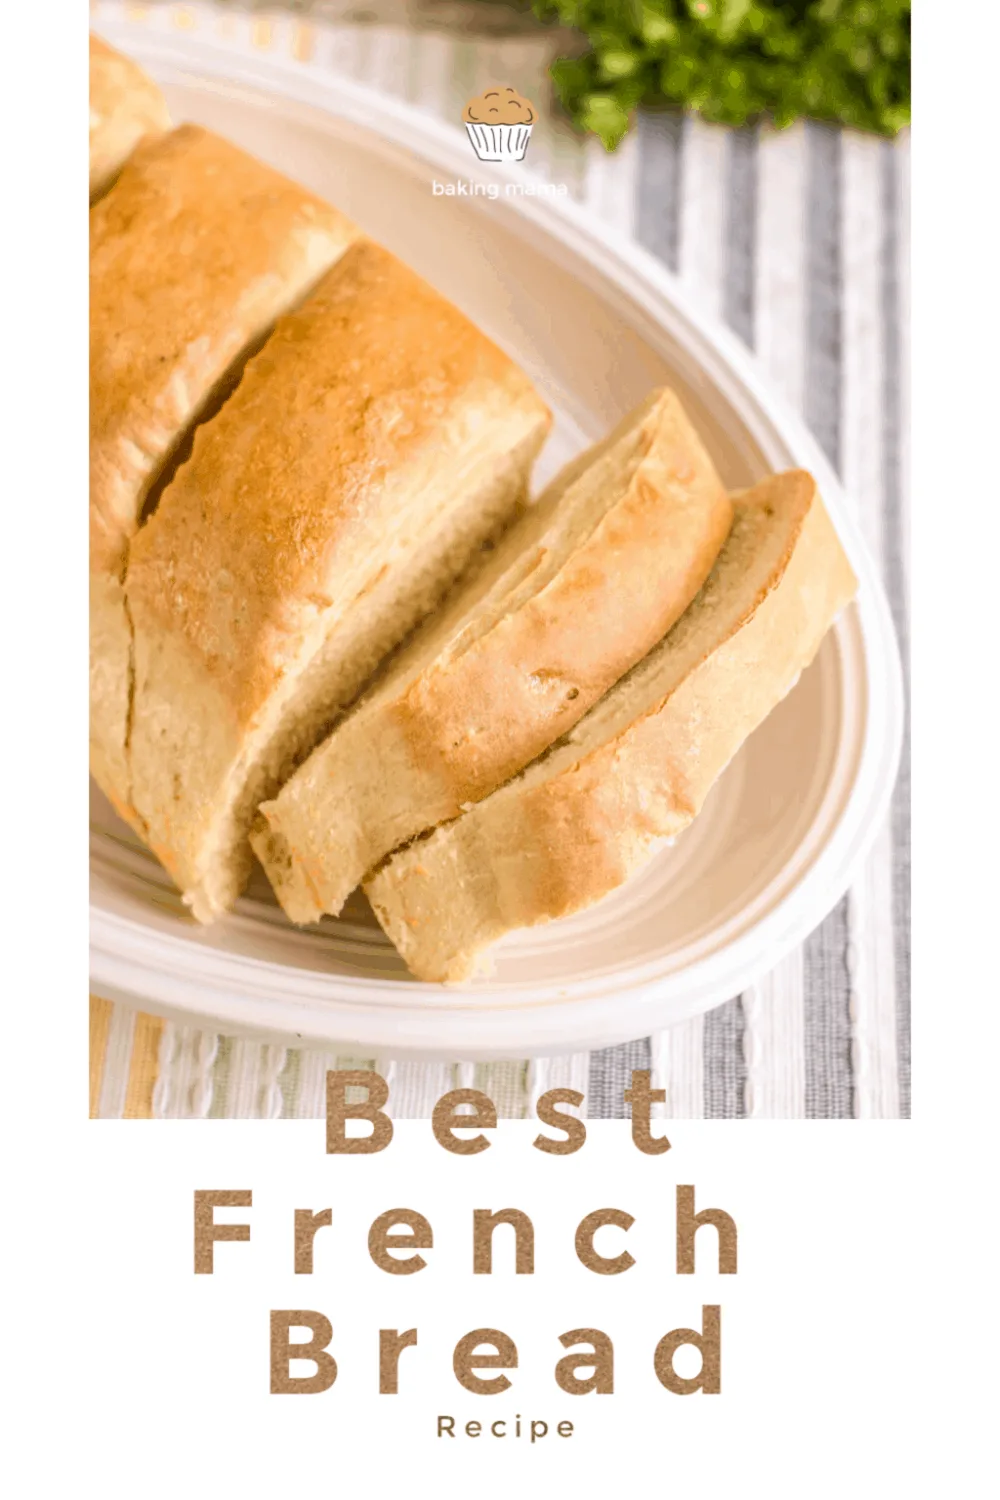 Stand Mixer French Bread is easy to make and so delicious. #bread dough #bread recipe #french bread #standmixerfrenchbread #mooreorlesscooking via @Mooreorlesscook